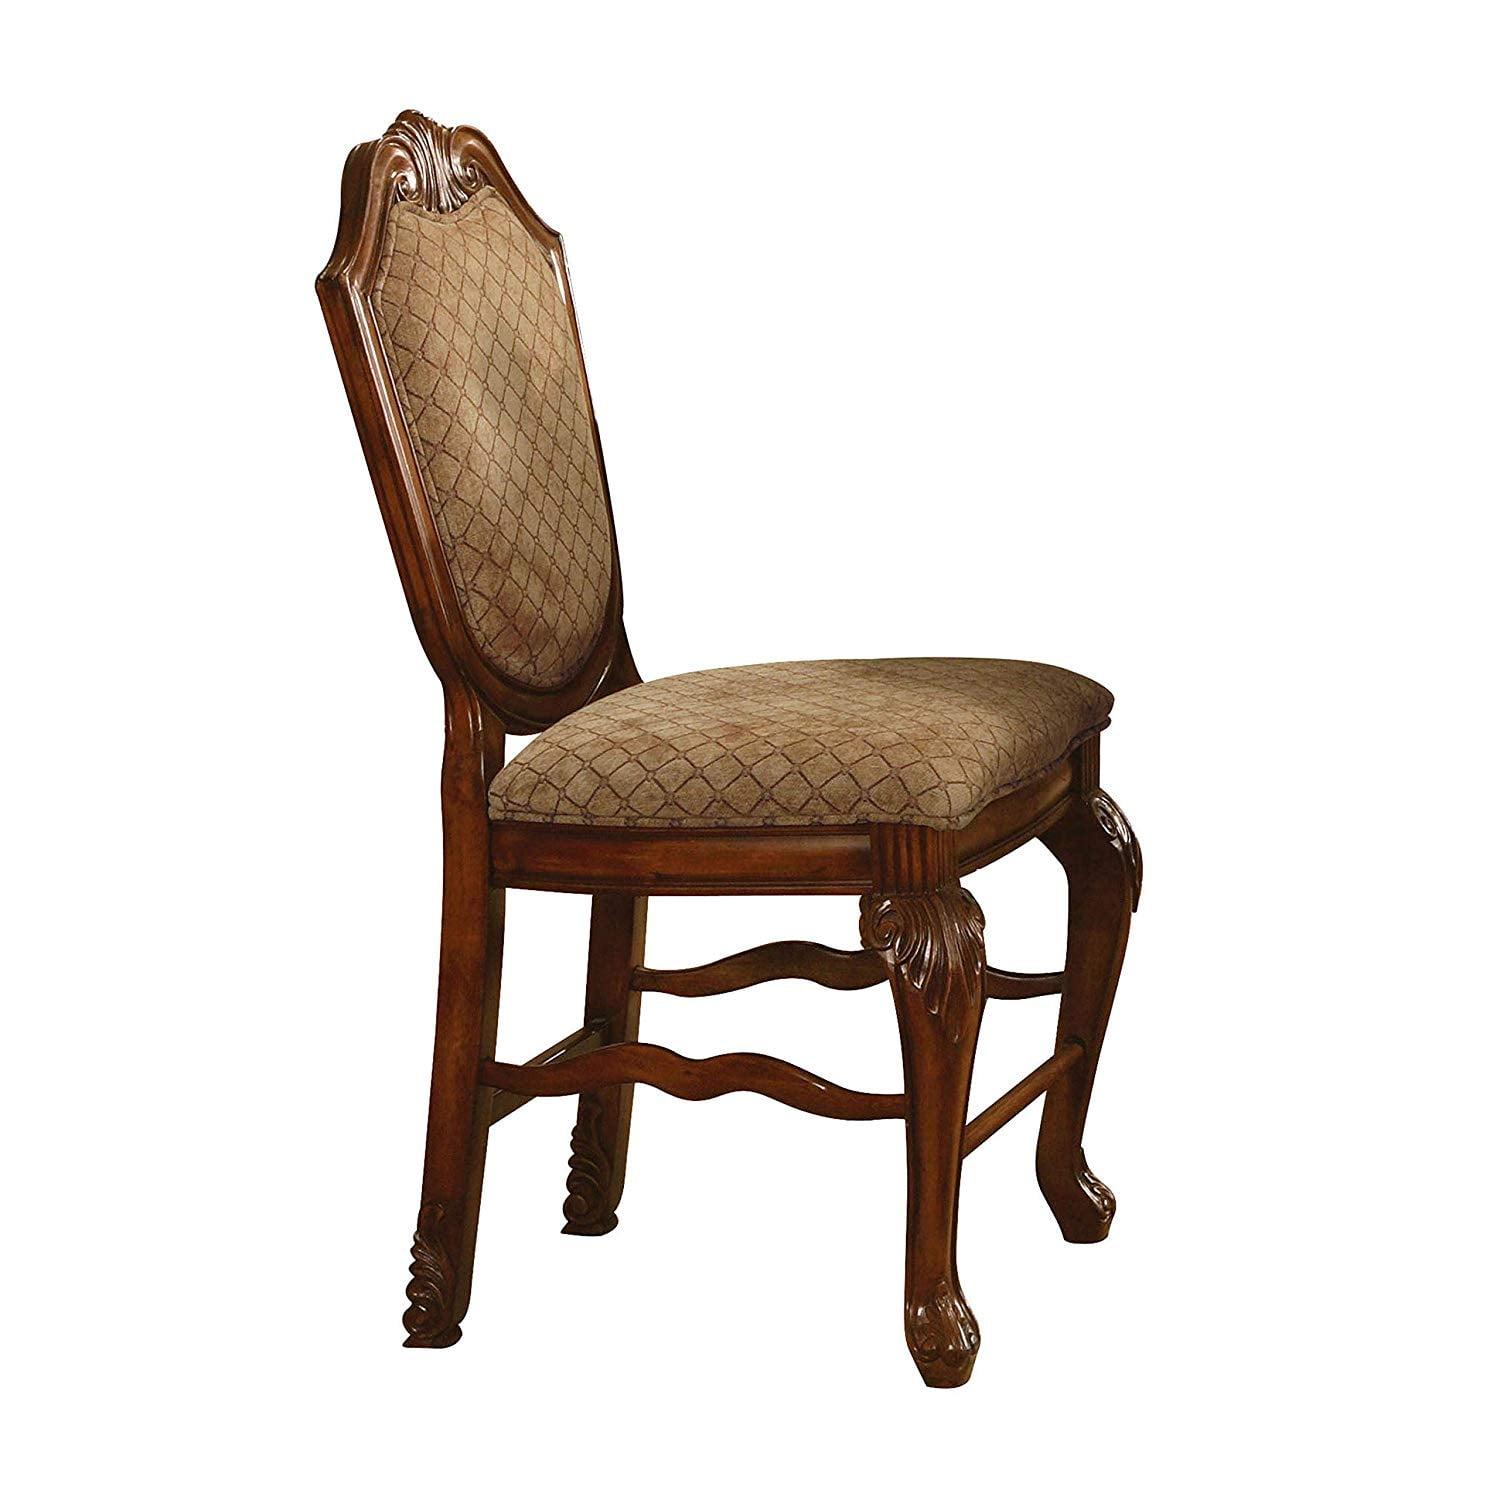 Elevated Cherry Wood Upholstered Side Chair with High Back